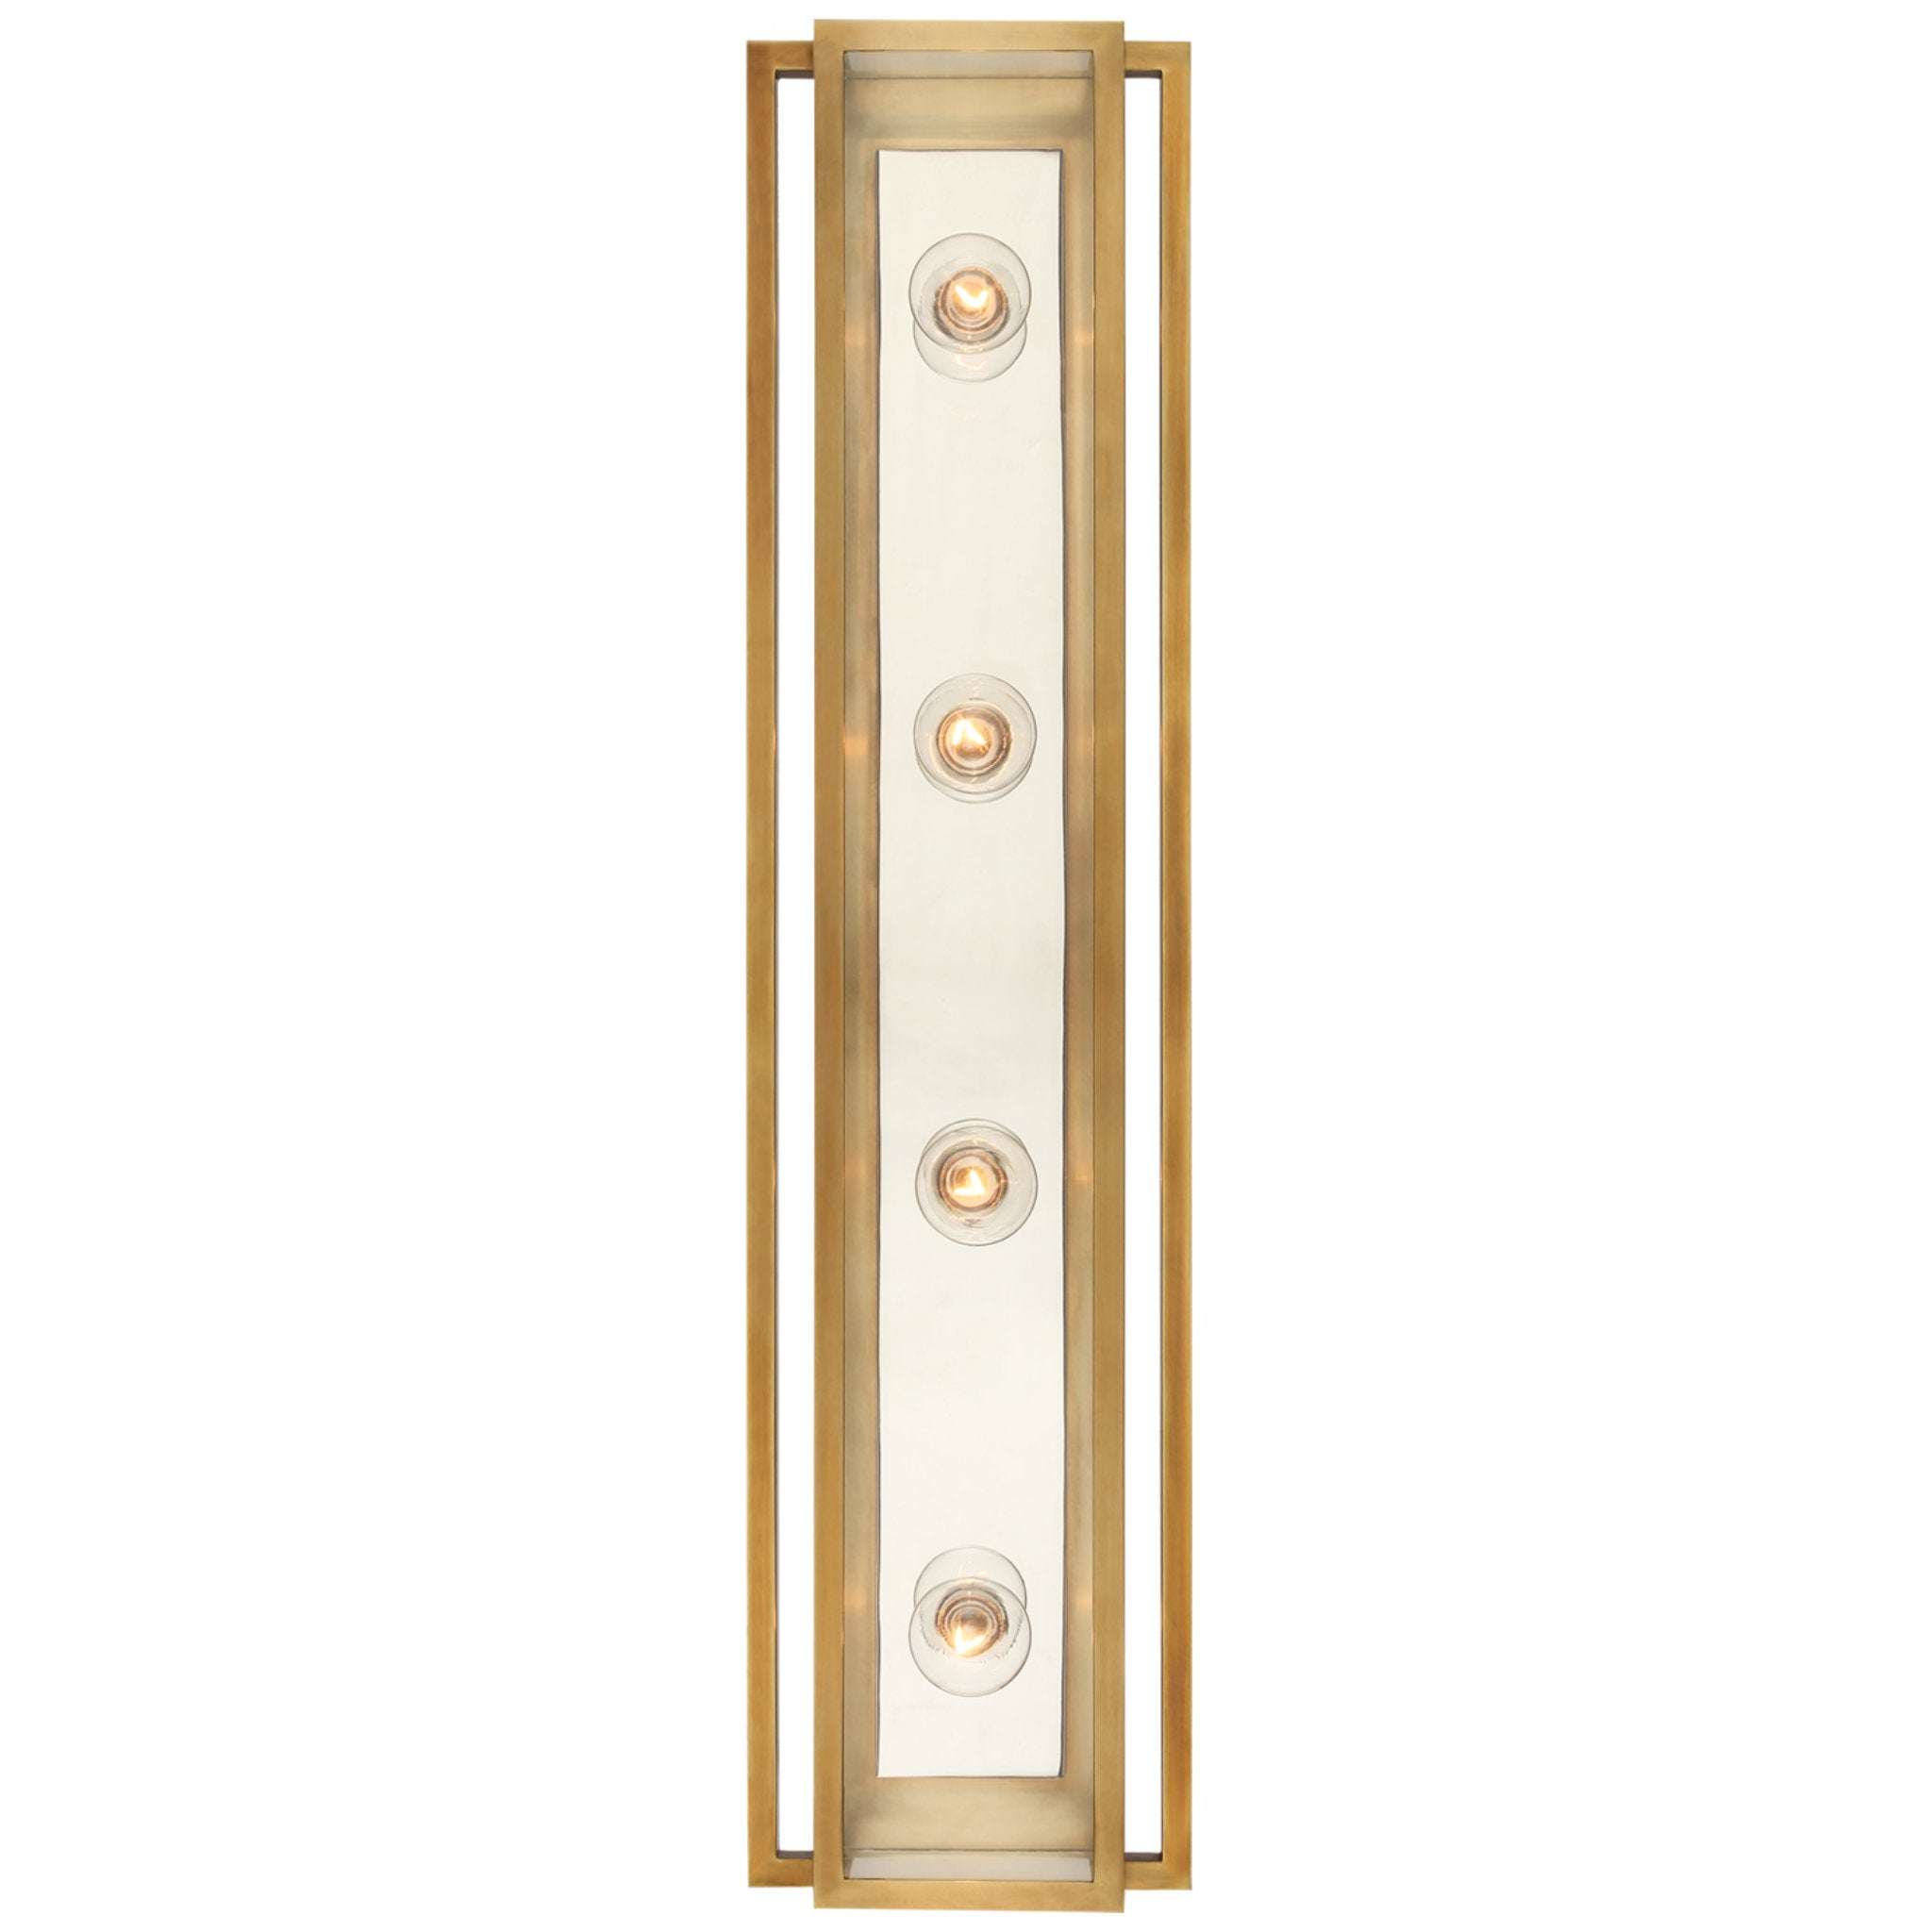 Ian K. Fowler Halle 30" Vanity Light in Hand-Rubbed Antique Brass and Polished Nickel with Clear Glass